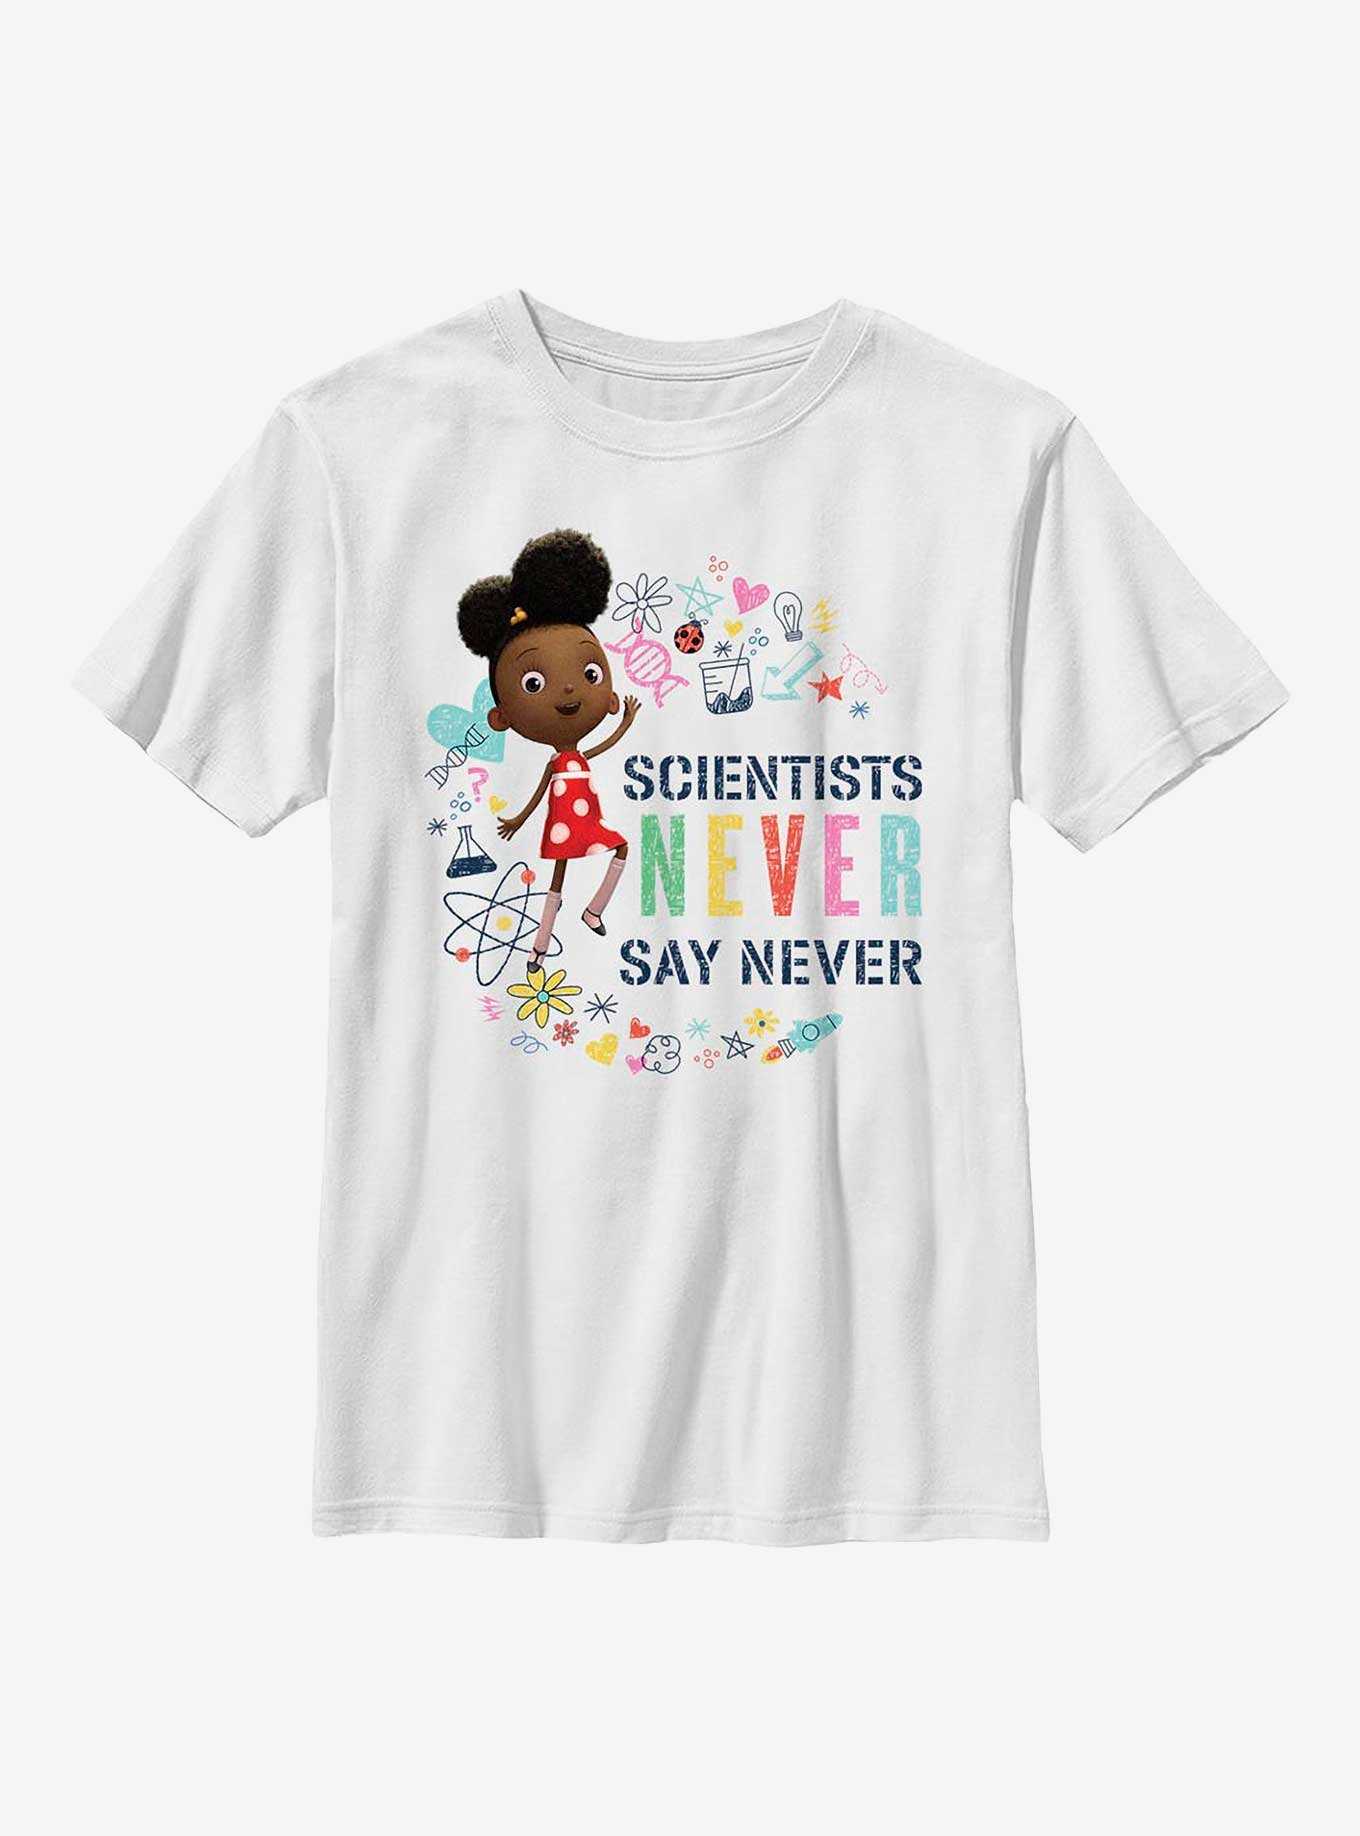 Ada Twist, Scientist Never Say Never Youth T-Shirt, , hi-res